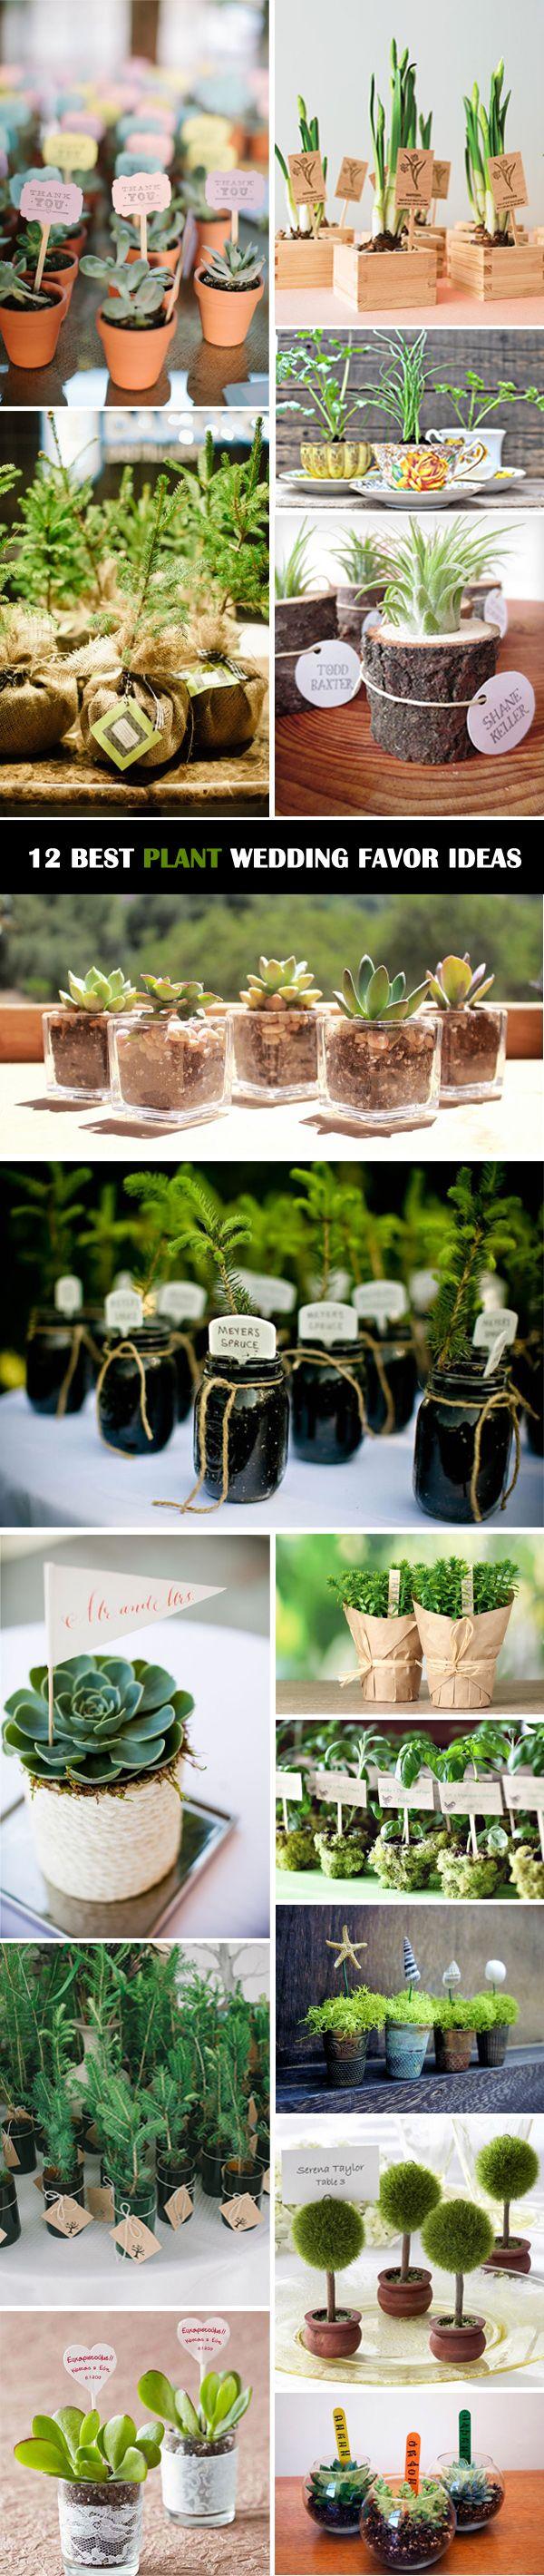 Wedding - 12 Ultimate Great Ideas For Lovely Plant Wedding Favors